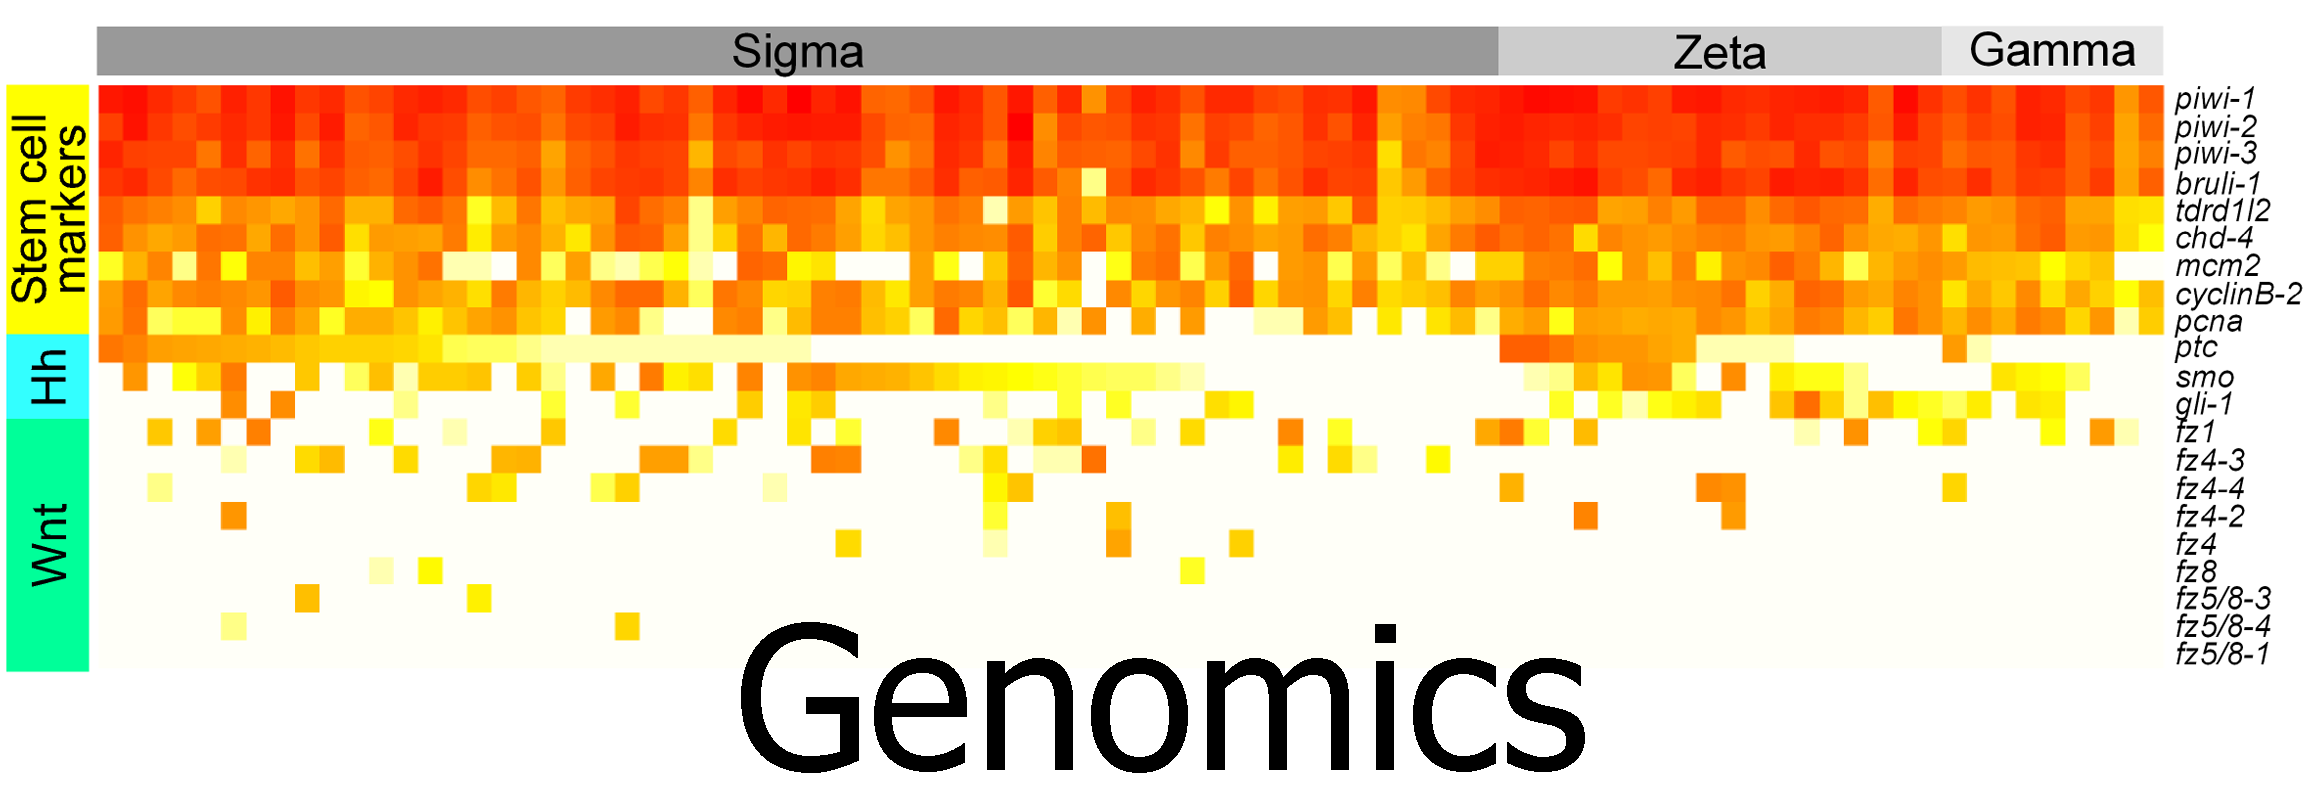 Heat map image for genomic projects in the lab